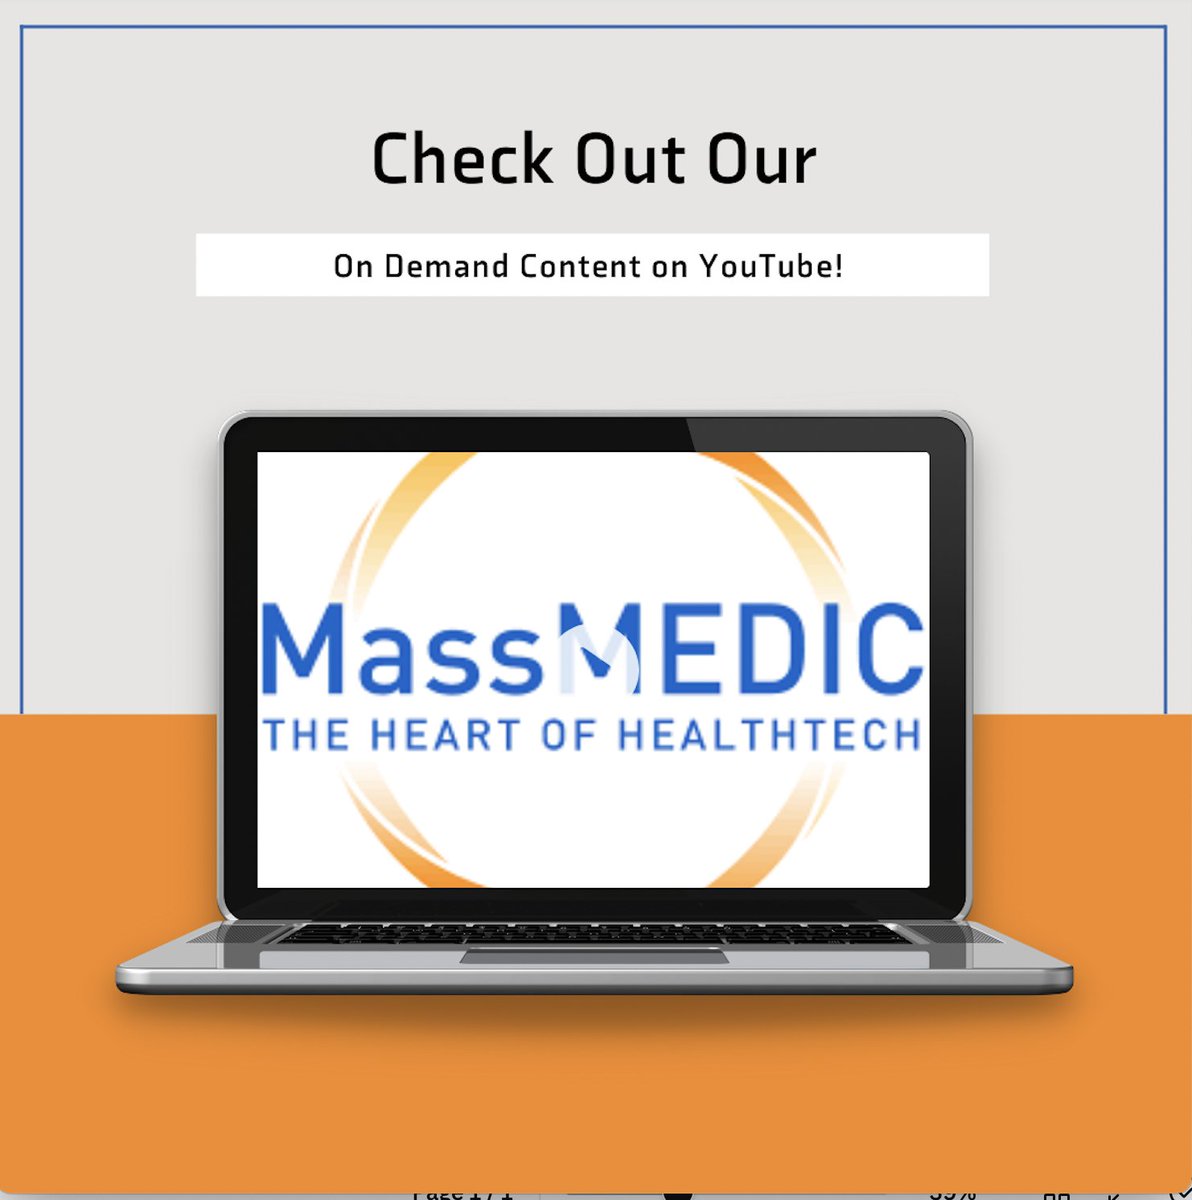 Immerse yourself in knowledge through our on-demand educational content on YouTube! 💻 🚀 It's all available on-demand and completely free of charge! 🌐

Access our Youtube channel here; bit.ly/3QGuUNY   

#EducationalExcellence #HealthcareInsights #OnDemandLearning